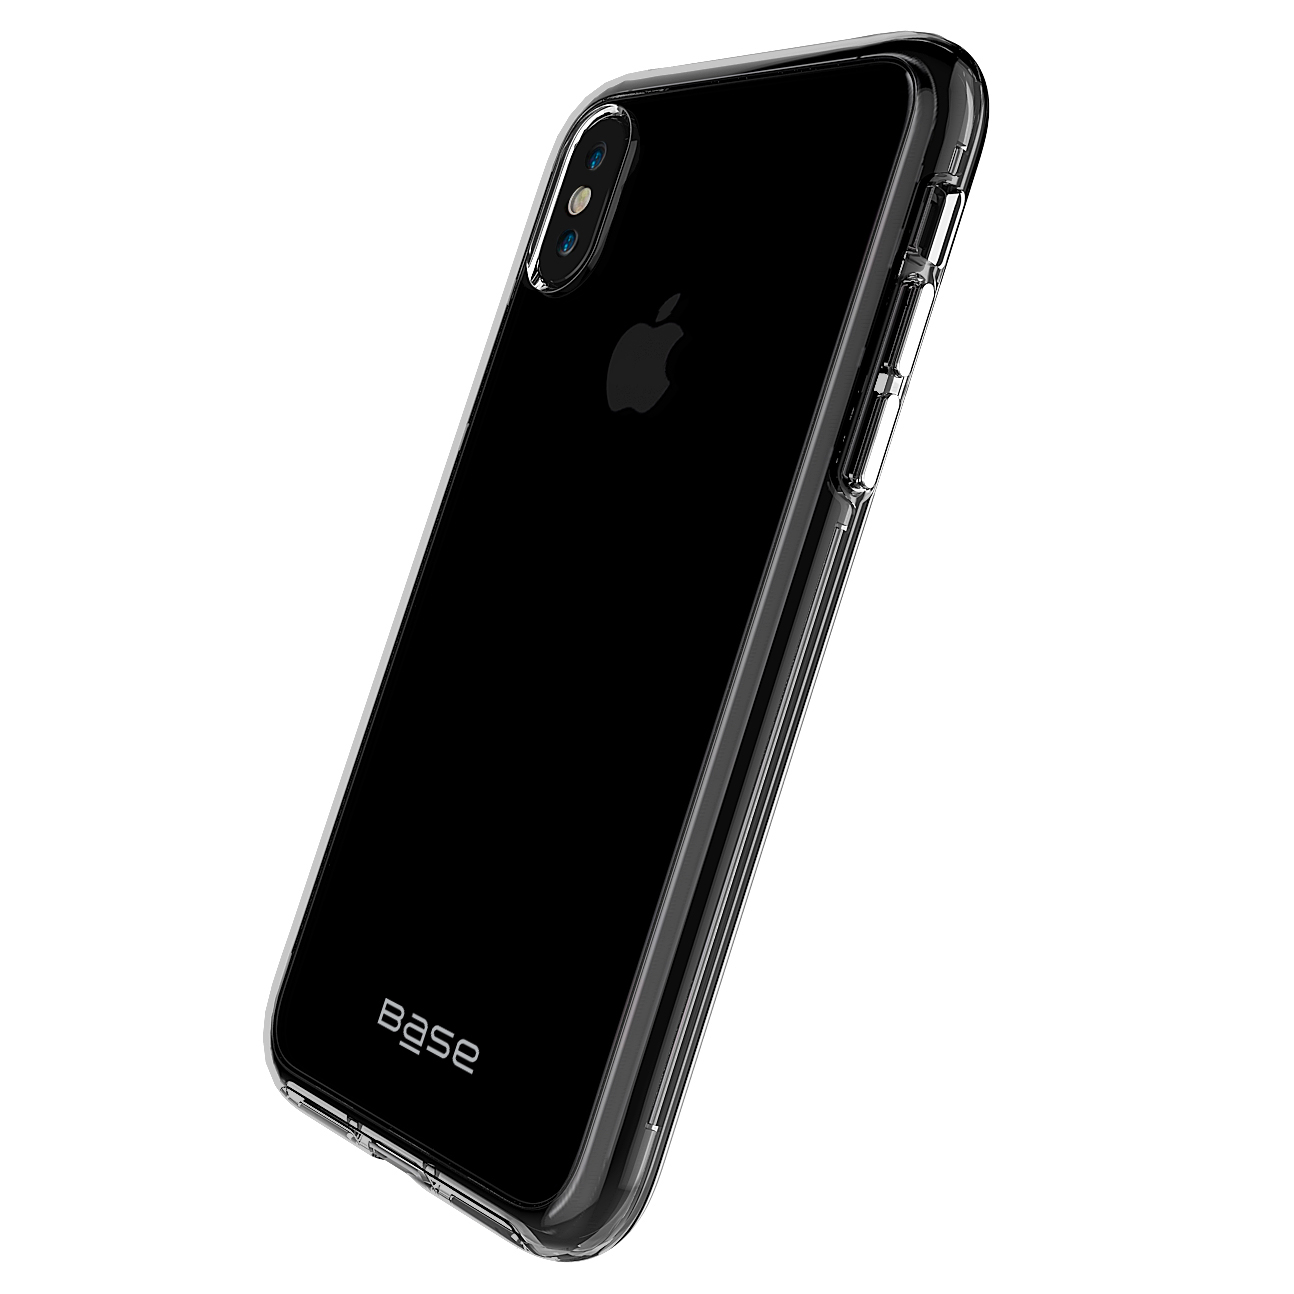 Base Crystal Shield - Reinforced Bumper Protective Case for iPhone X - Black